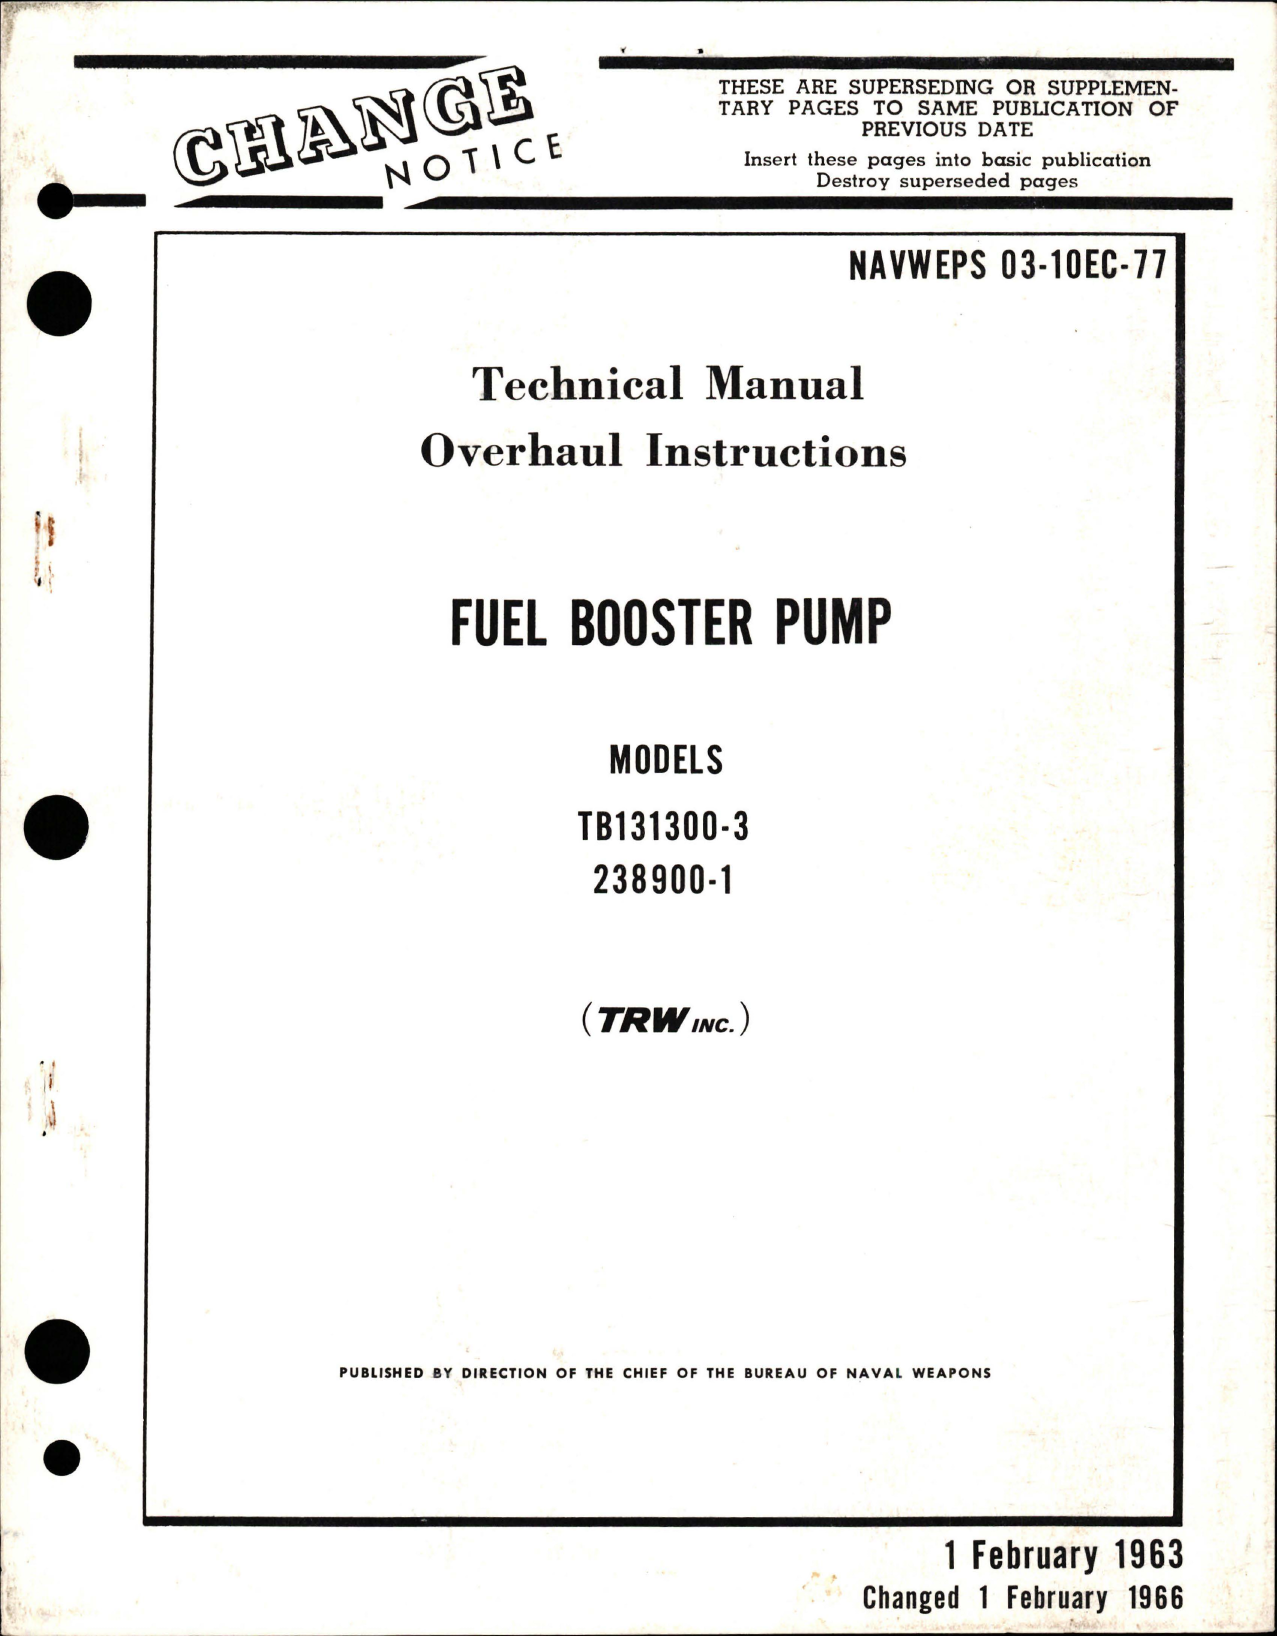 Sample page 1 from AirCorps Library document: Overhaul Instructions for Fuel Booster Pump - Models TB131300-3, 238900-1